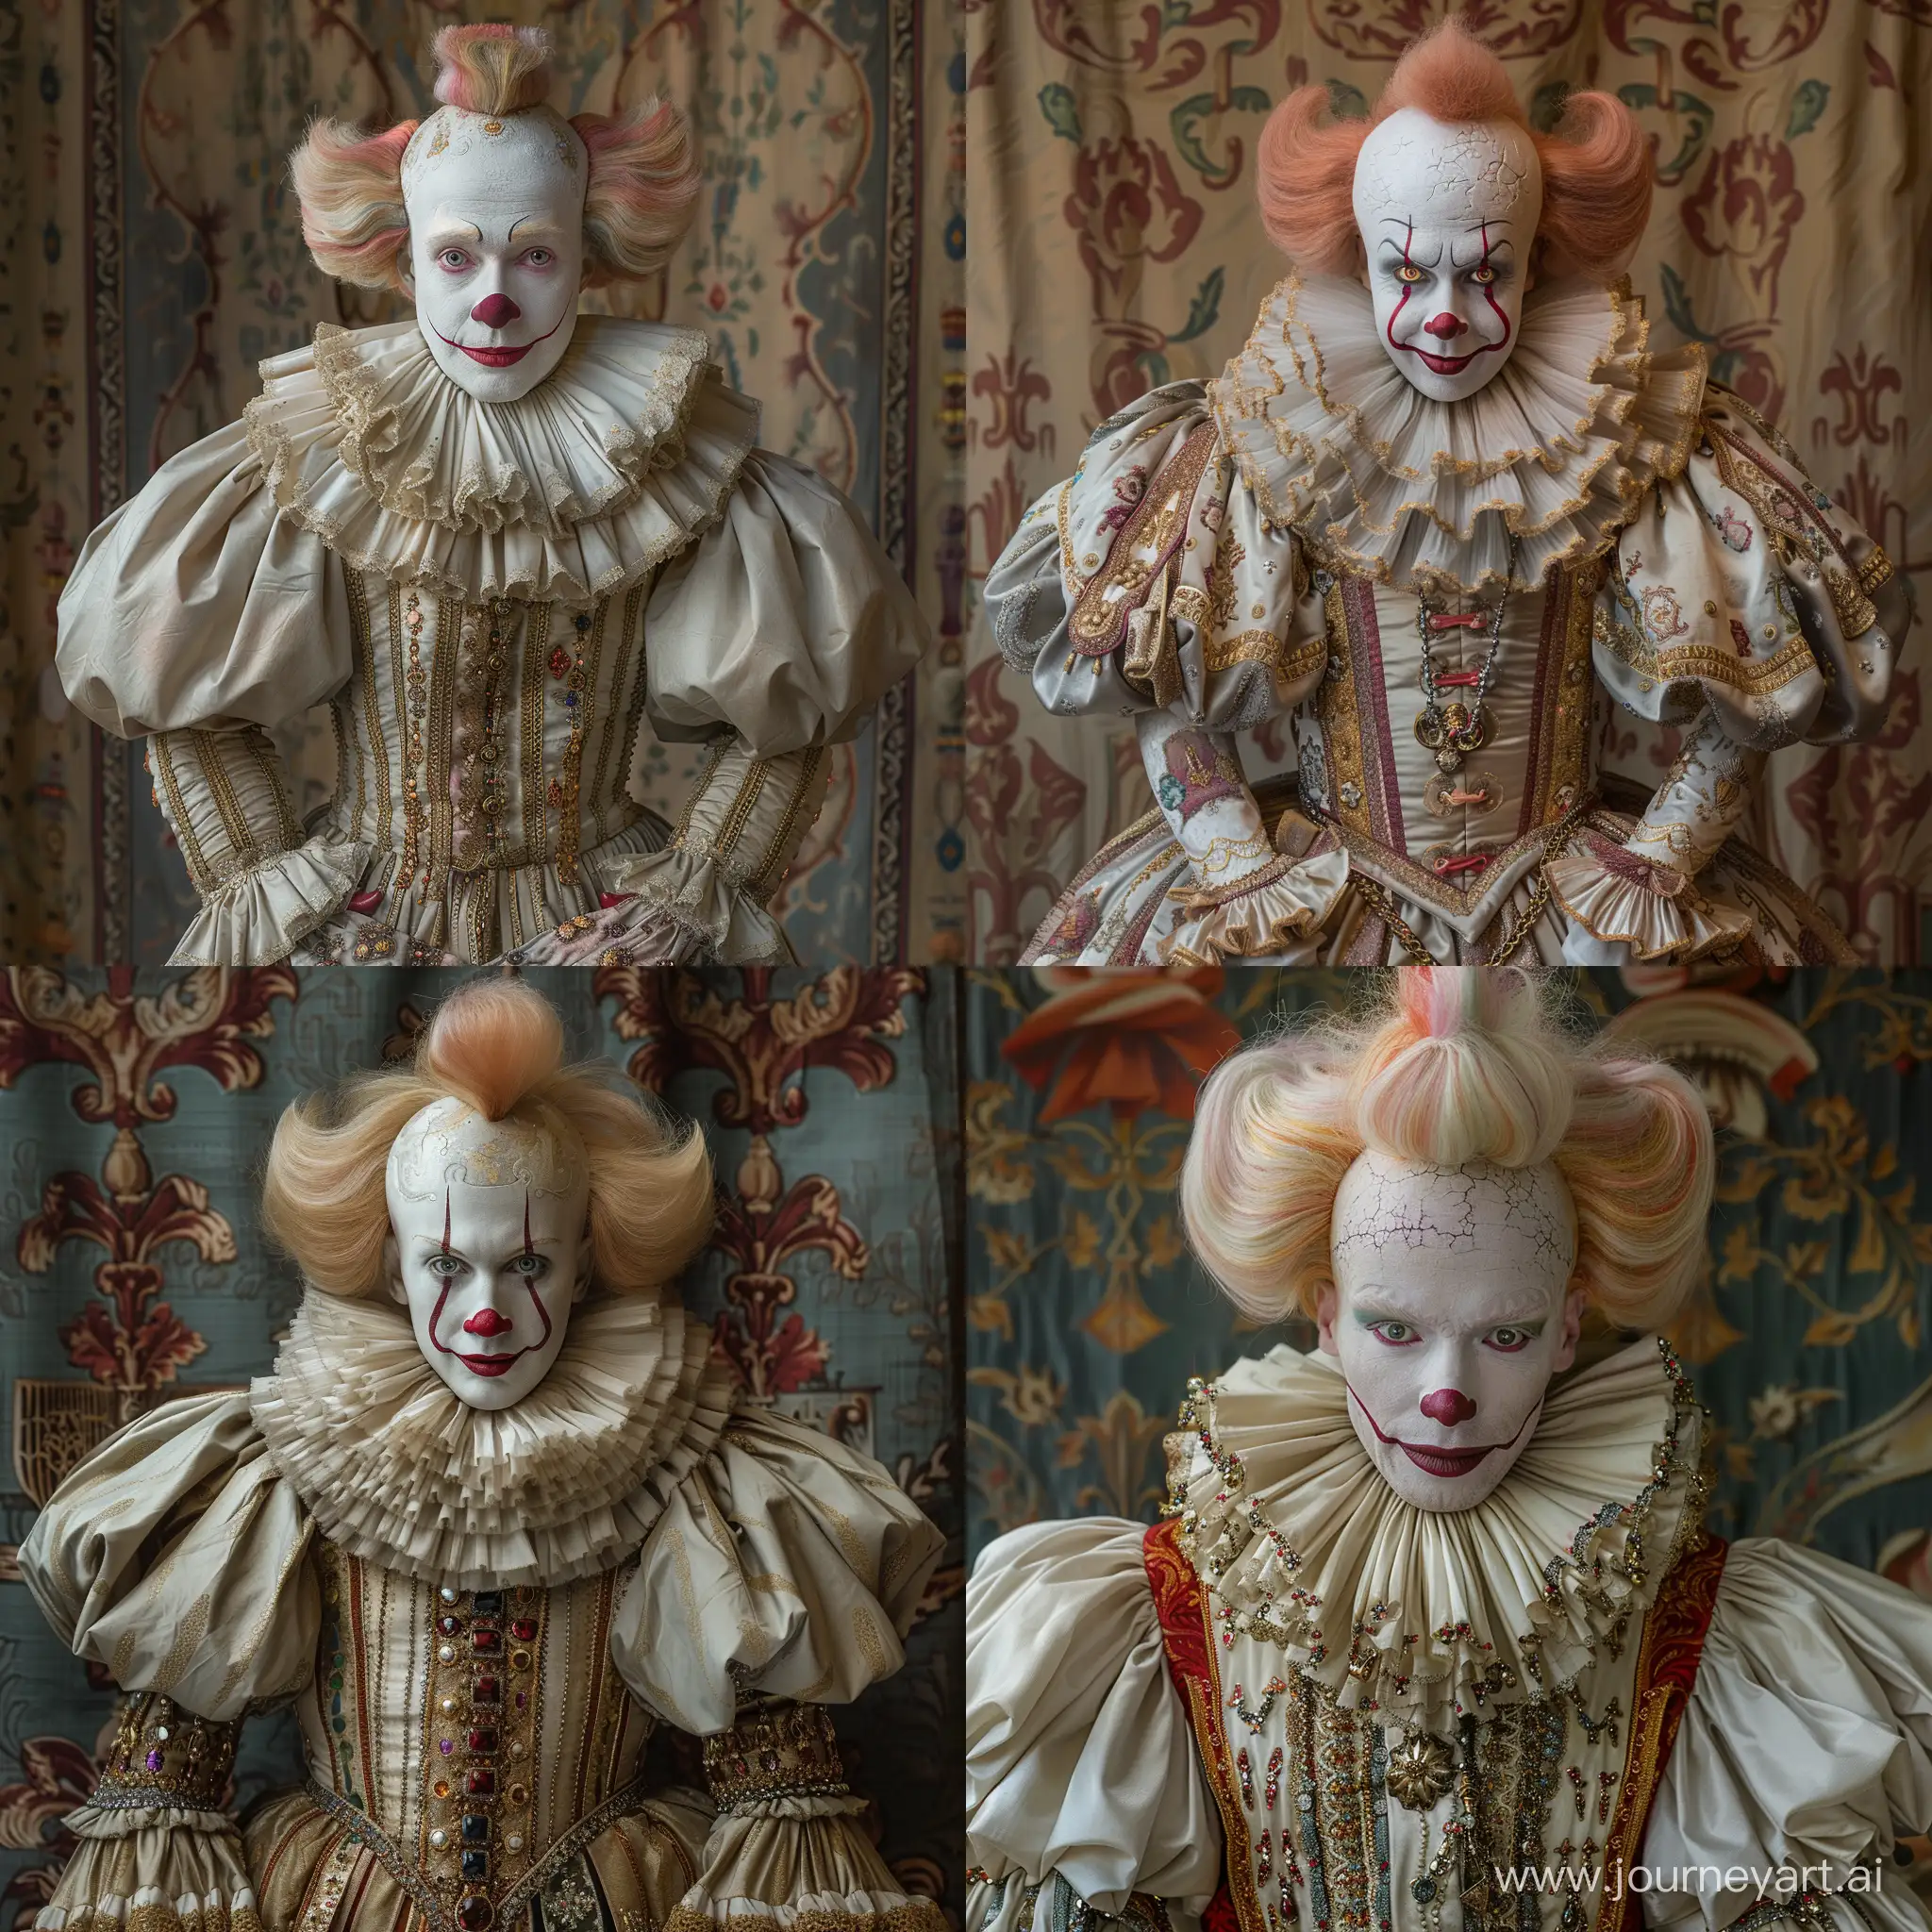 an clown dressed in an elaborate costume reminiscent of European fashion from the 16th to 17th century, which is often associated with the Renaissance period. characteristic of the styles from that era.
The costume boasts intricate details and patterns, with a blend of rich colors and gold accents. It includes a jacket or doublet with puffed sleeves that have slashes or panes showing fabric underneath, and decorative attachments that could be aghast to jewels and embellishments. The individual is also wearing several pieces of jewelry, including chains, possibly signifying status or wealth.
The person is directly facing the camera with a neutral to slightly amiable expression. The lighting is focused on the person, leaving the background slightly darker which helps to highlight the subject and the impressive detail of their costume.
The backdrop has a renaissance-style pattern that complements the historical theme of the attire. The color scheme and design elements in the costume and background together produce an image that resonates with a regal and historical aesthetic. --stylize 750